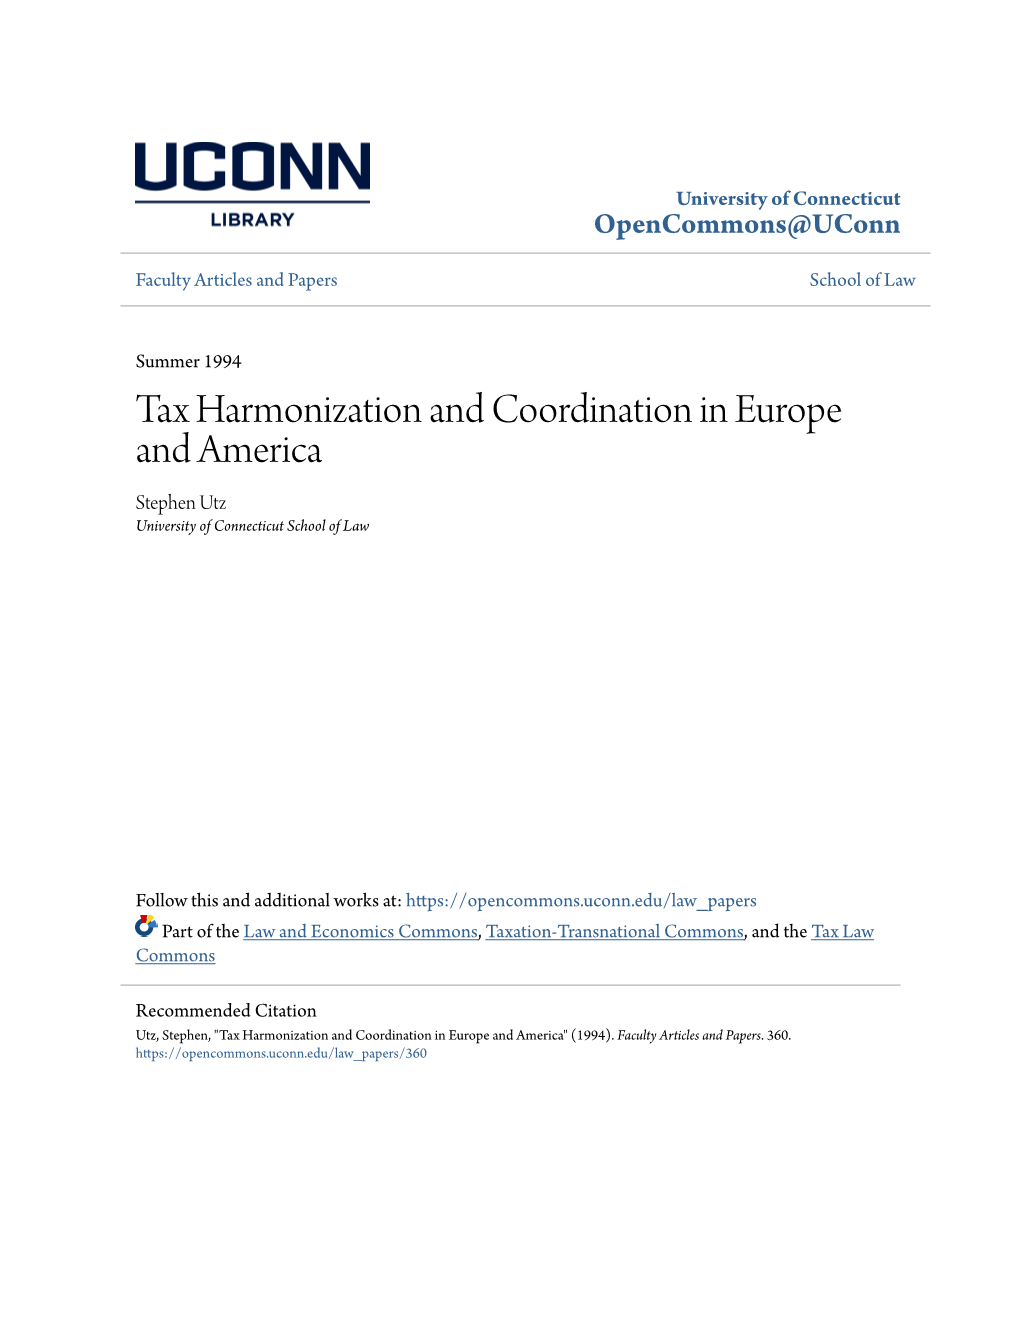 Tax Harmonization and Coordination in Europe and America Stephen Utz University of Connecticut School of Law